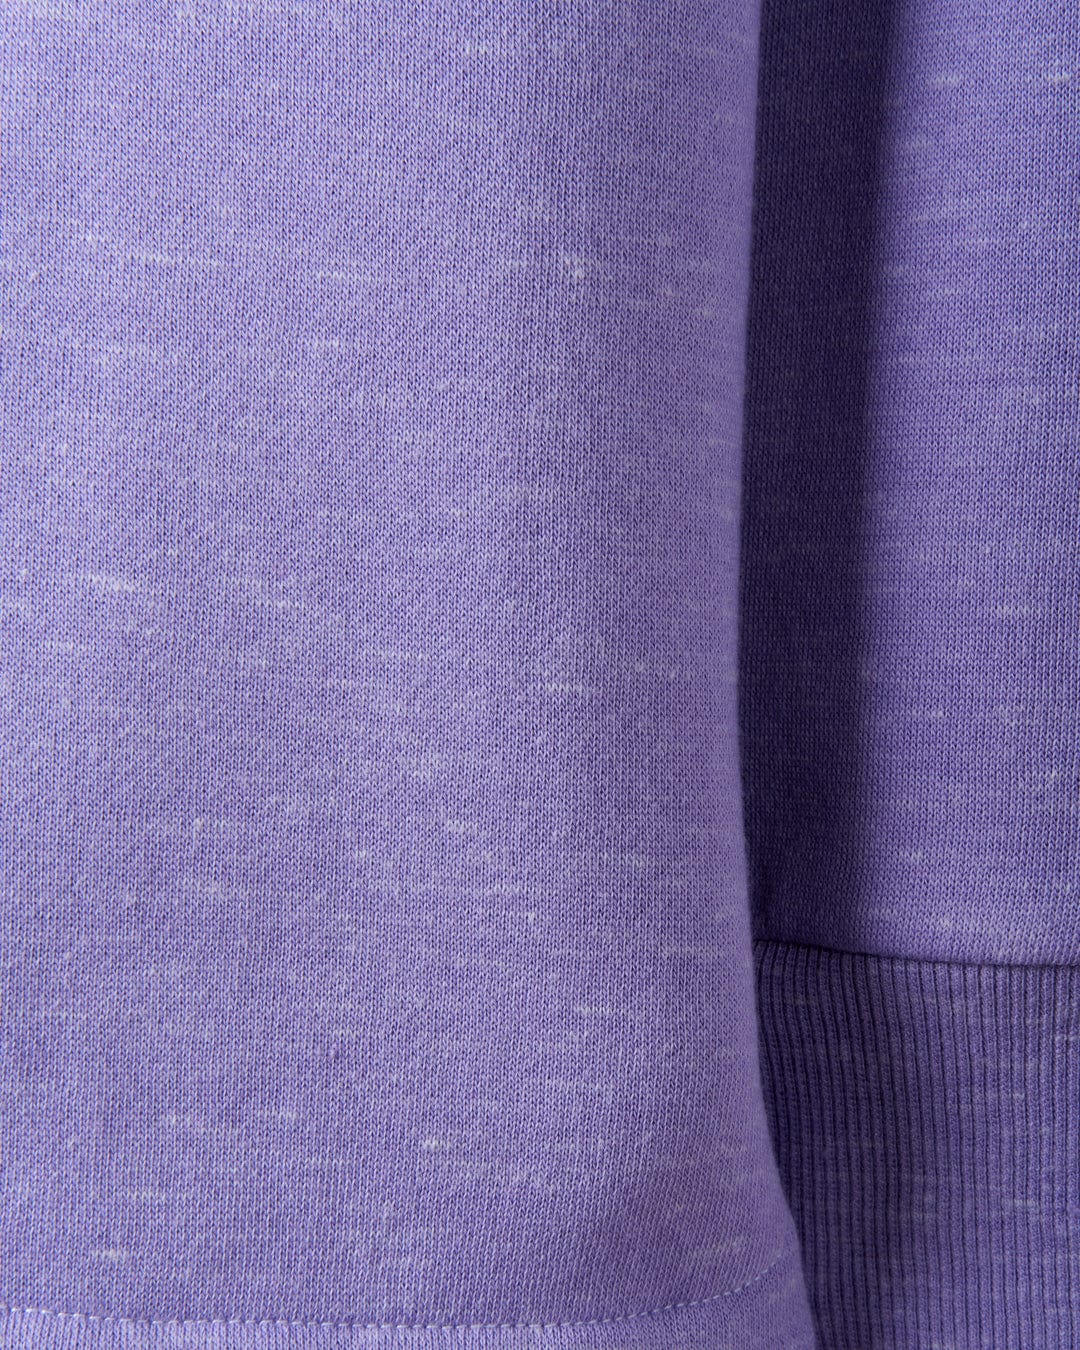 A Harper - Womens Longline Pop Sweat - Lilac by Saltrock featuring embroidered branding.